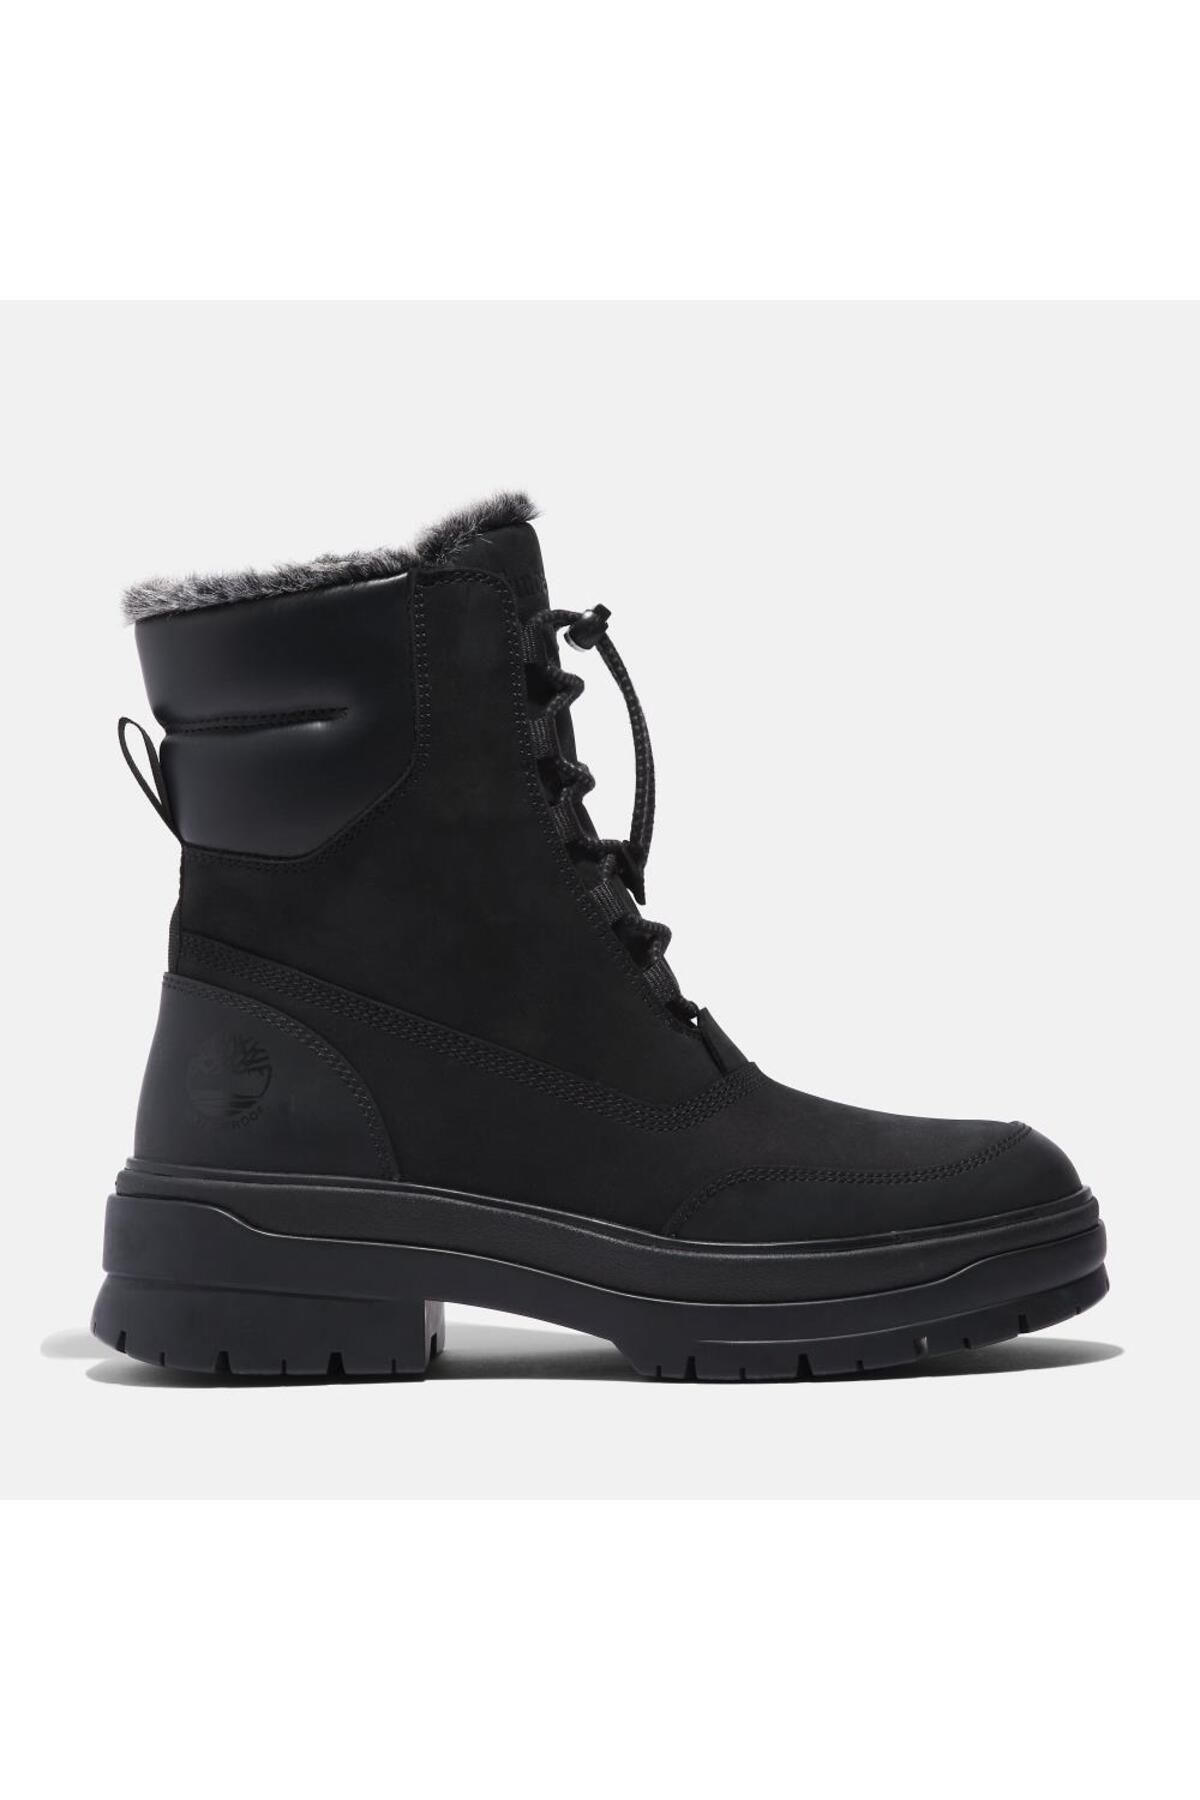 Timberland TİMBERLAND MID PULL ON WATERPROOF BOOT TB0A5Y1Z0151